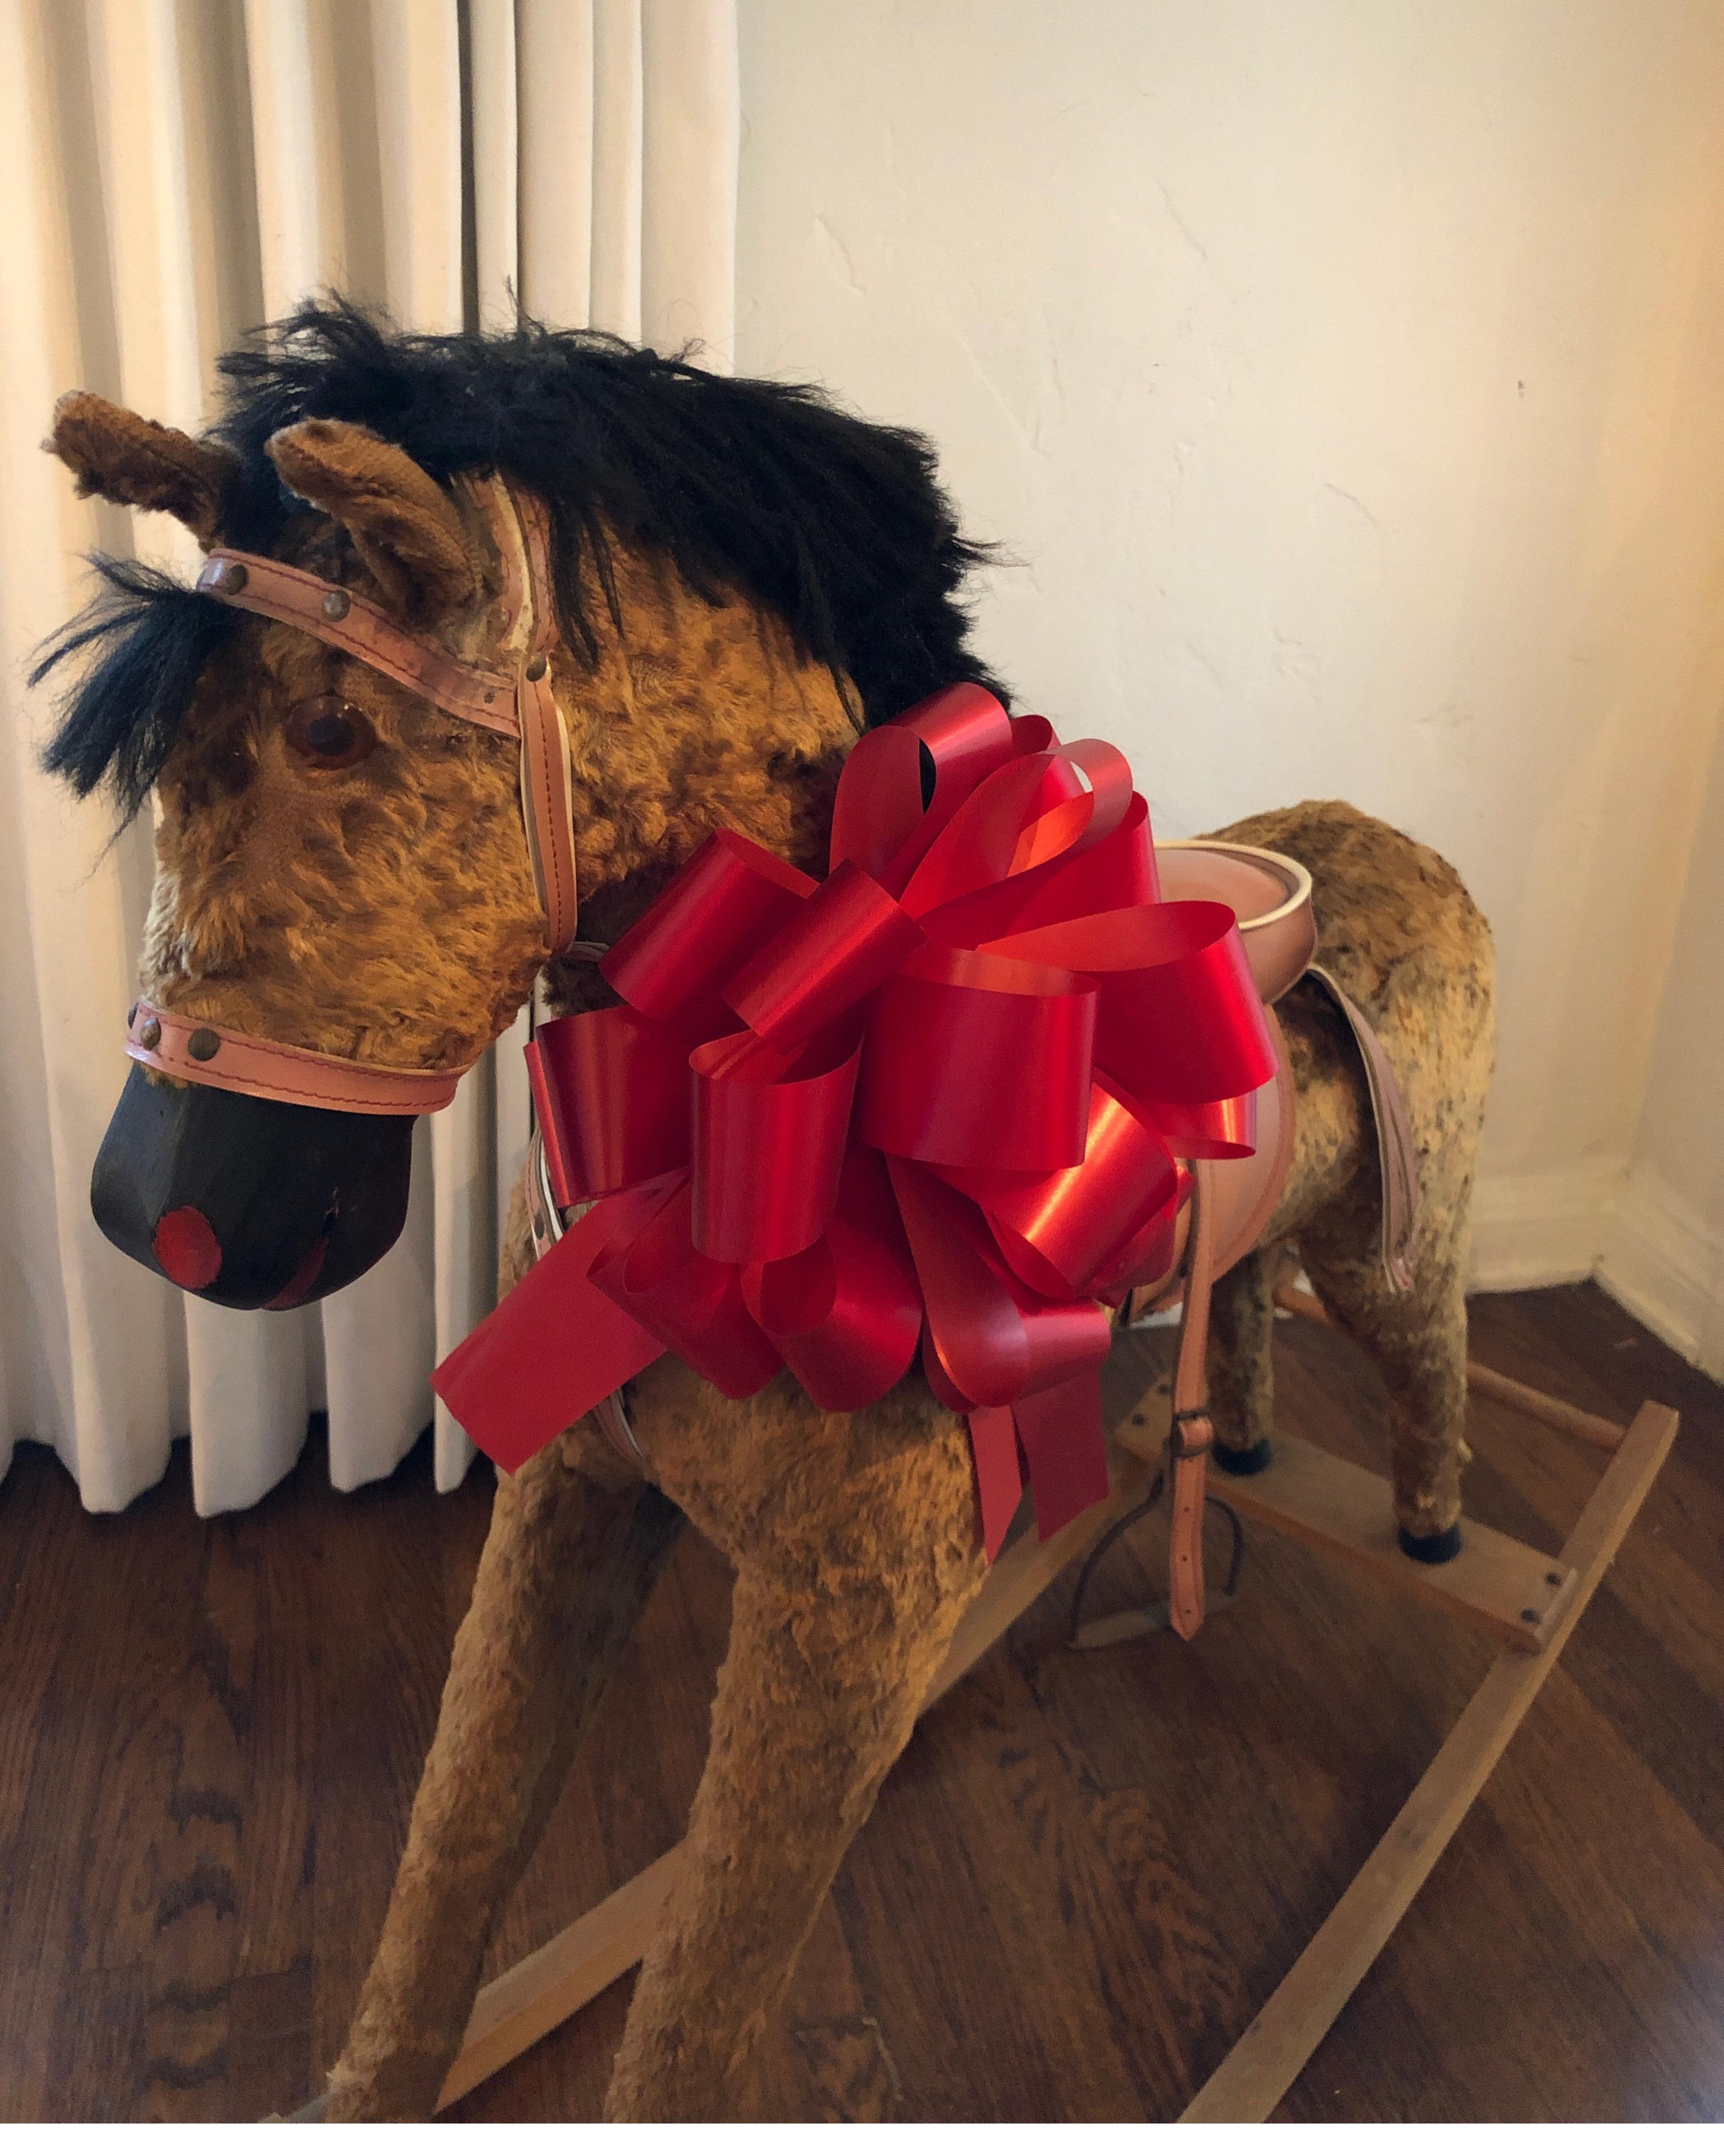 Carved wood rocking horse with velvet type fur.
Complete with saddle and one iron stirrup.
Overall solid condition with signs of use consistent with age.
Ready for a child's bedroom.
Measures: 31” H 42” L x 12” W.